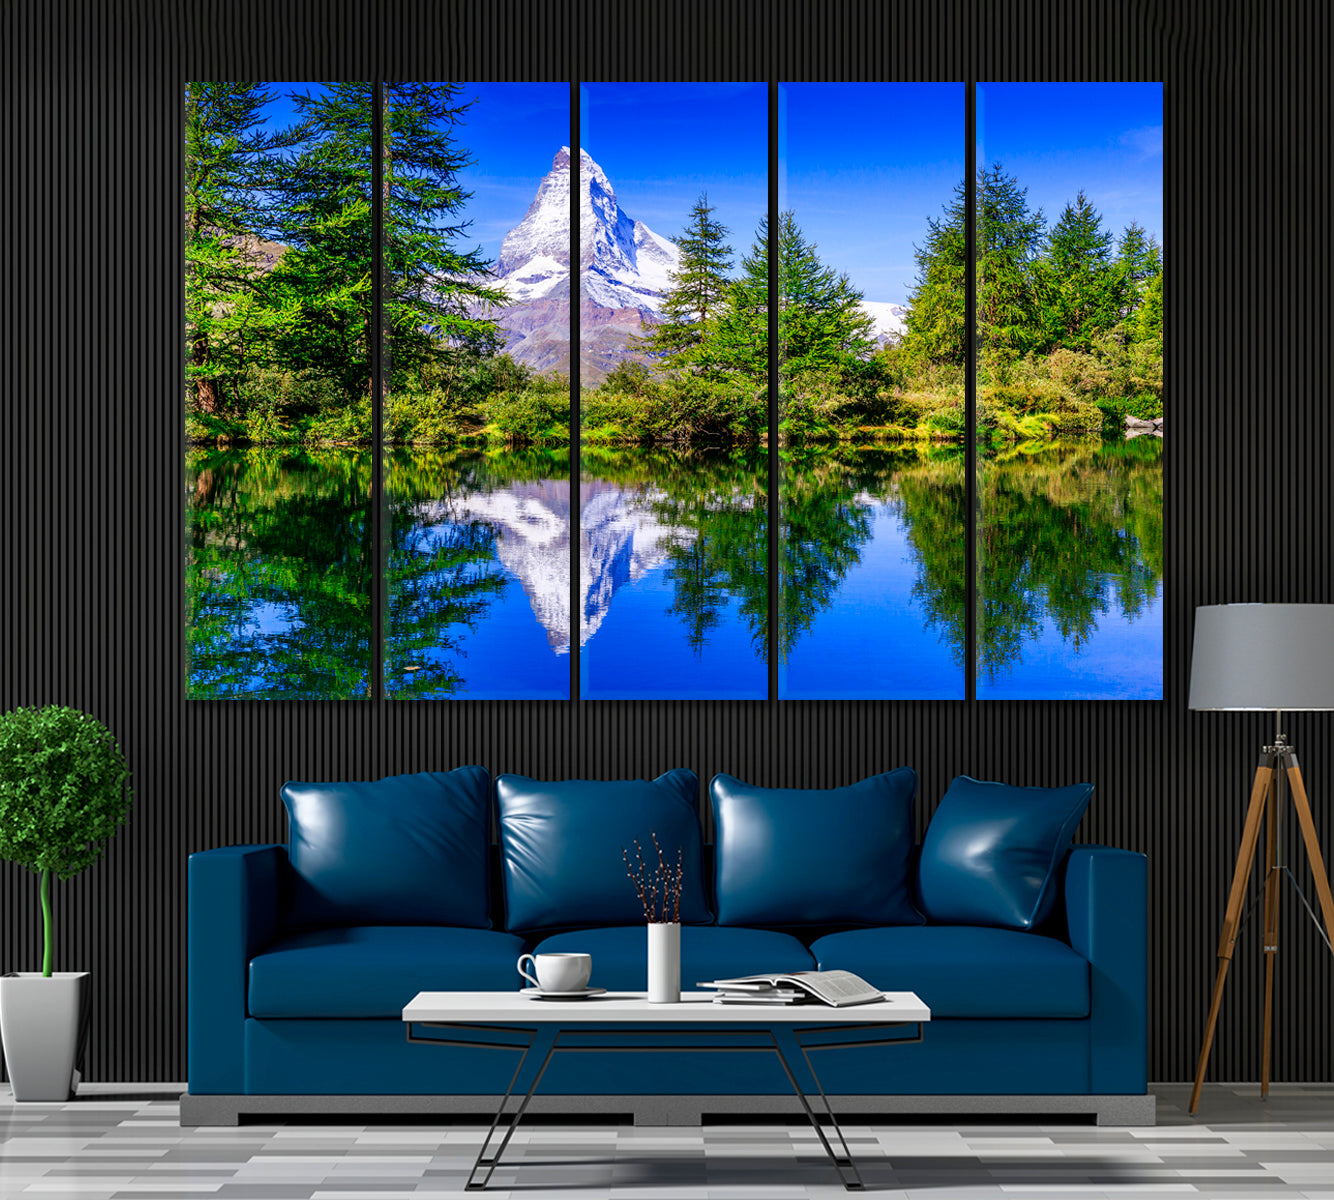 Matterhorn Mountain with Trees Reflection on Lake Switzerland Canvas Print ArtLexy 5 Panels 36"x24" inches 